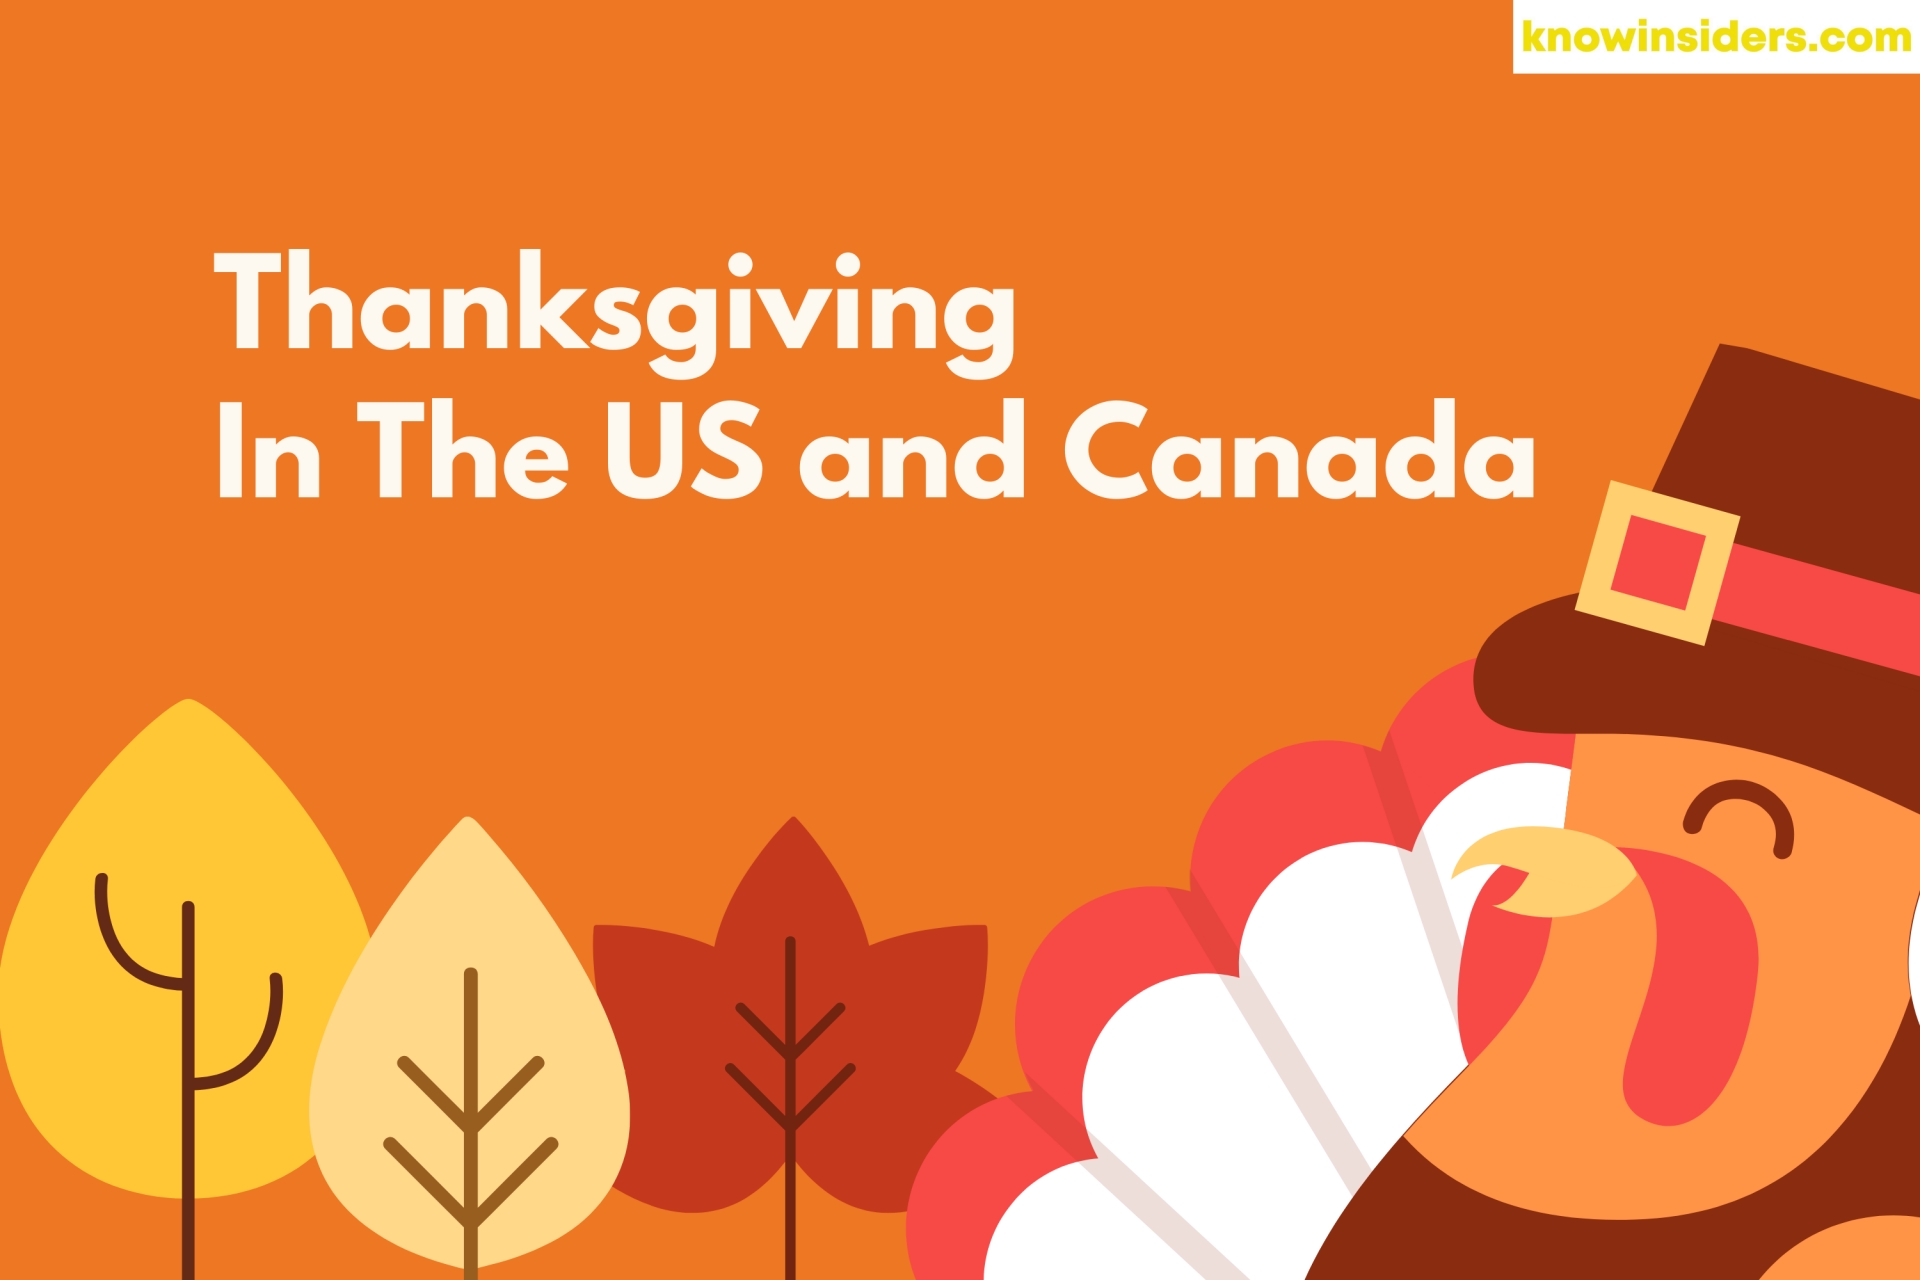 Thanksgiving In The US and Canada: Meaning & Differences